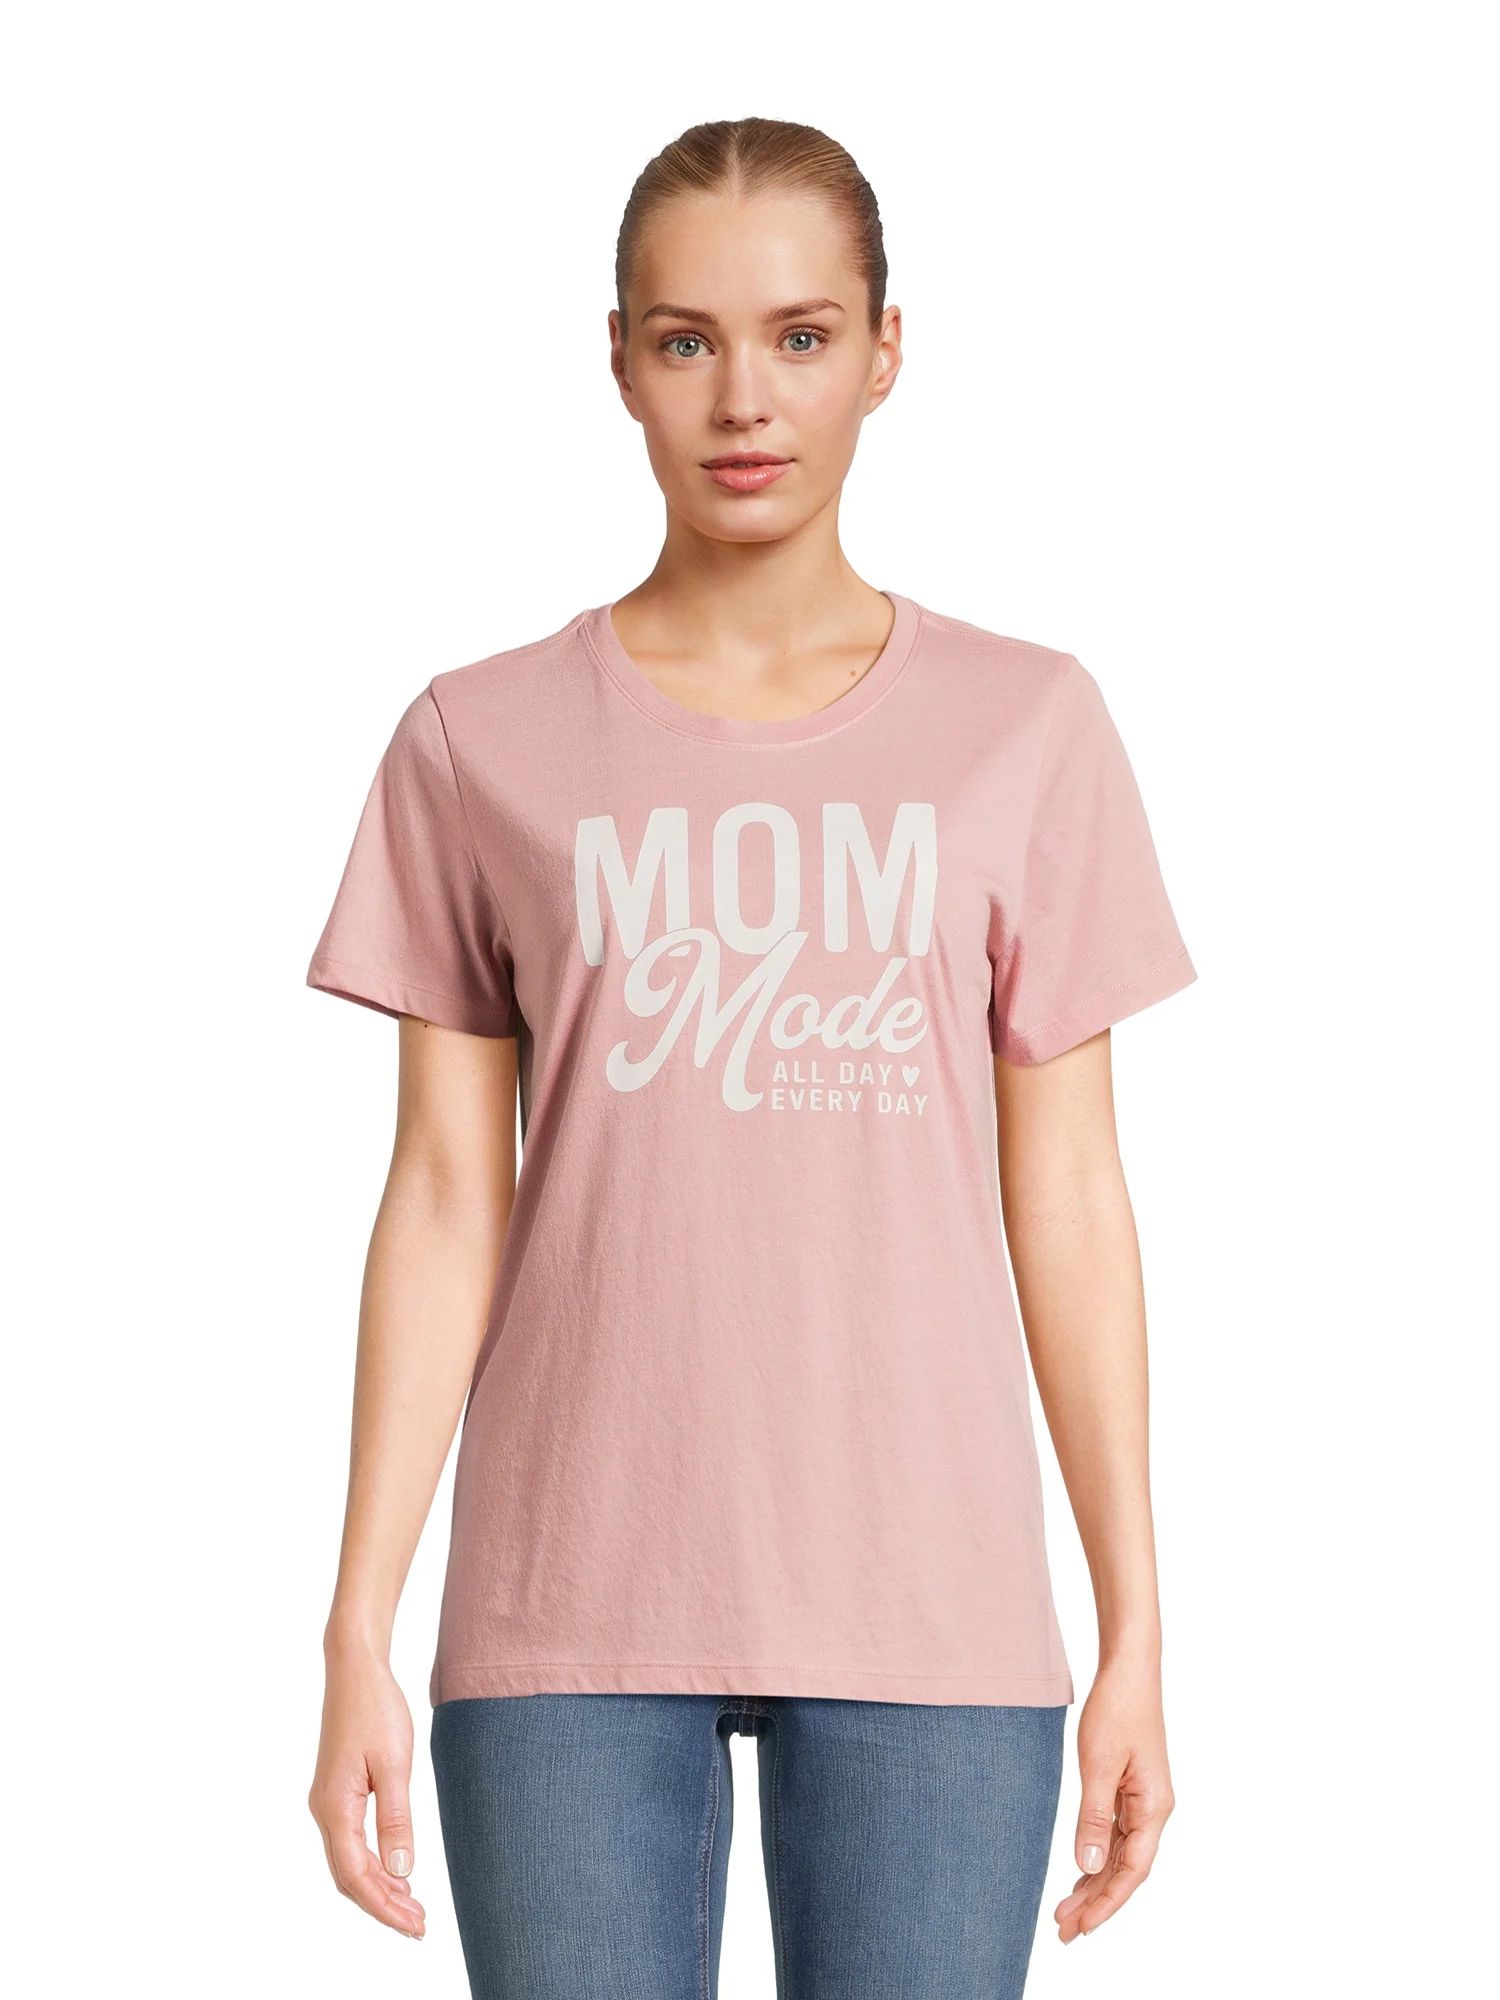 Mother's Day Women's Mom Mode Graphic Tee with Short Sleeves from Way to Celebrate, Sizes S-3XL | Walmart (US)